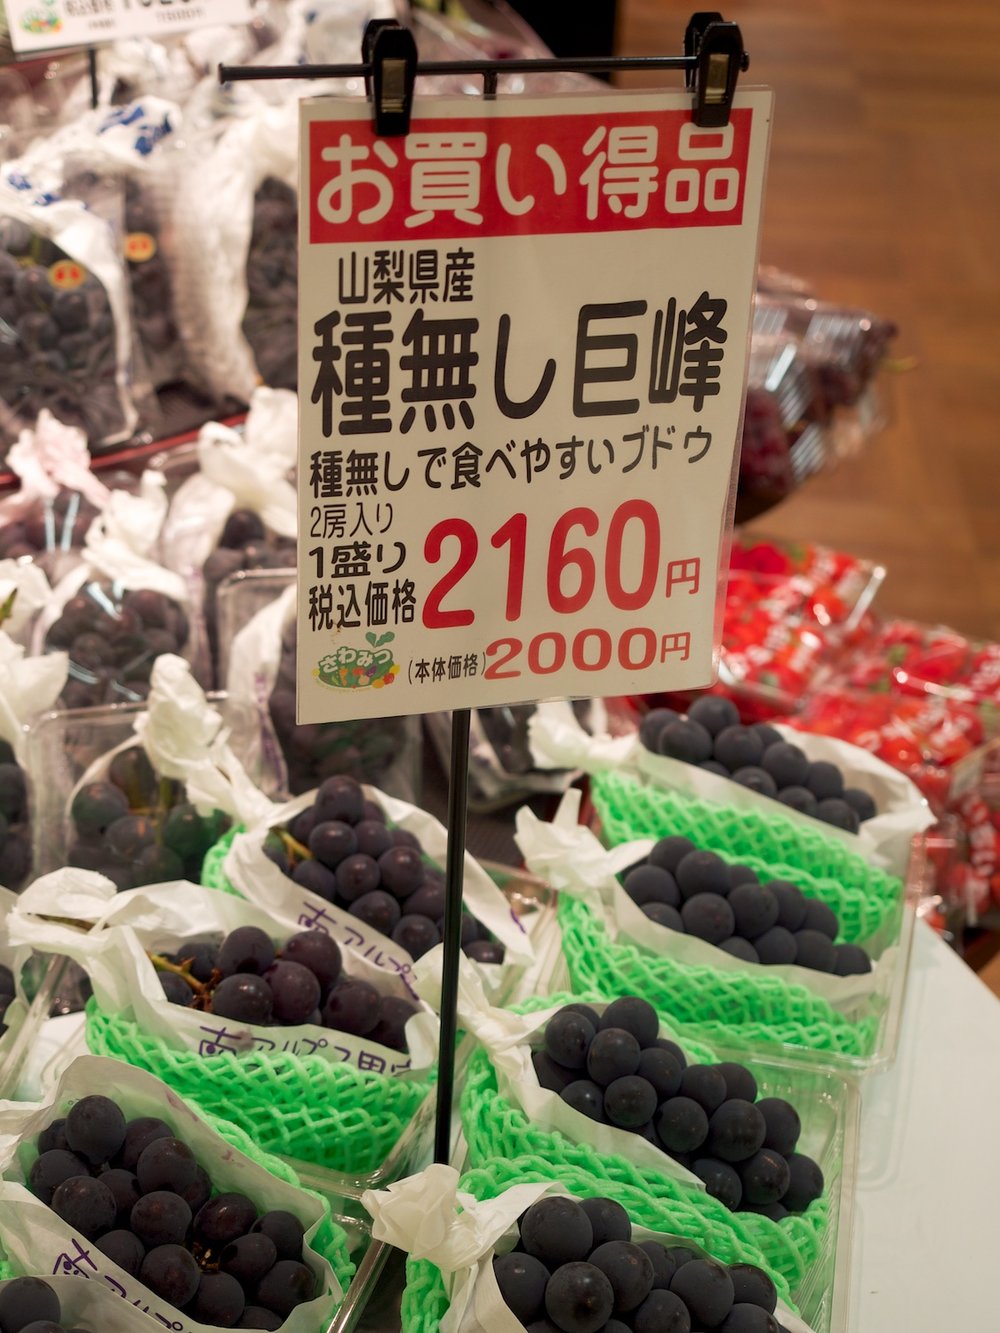 Incredibly expensive fruit is a gift, not a staple in Japan. Free samples were about all we got. 